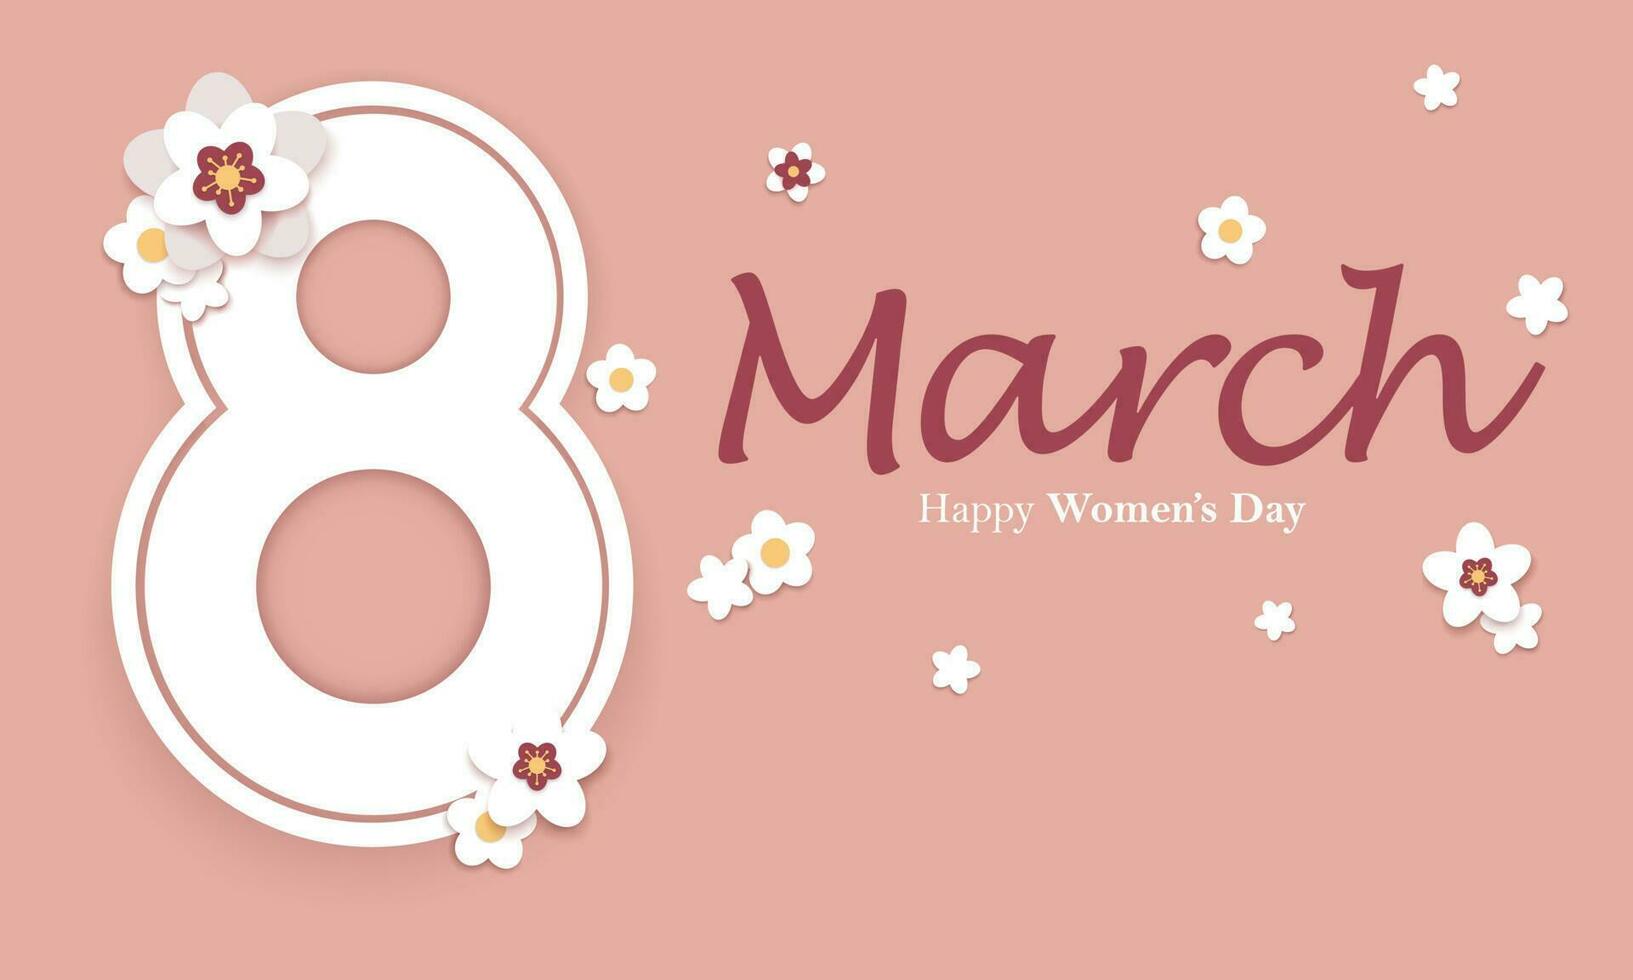 8 March and Women's Day horizontal greeting card or banner vector design. Big eight number and cherry blossom flowers in paper cut style on pale pink background.